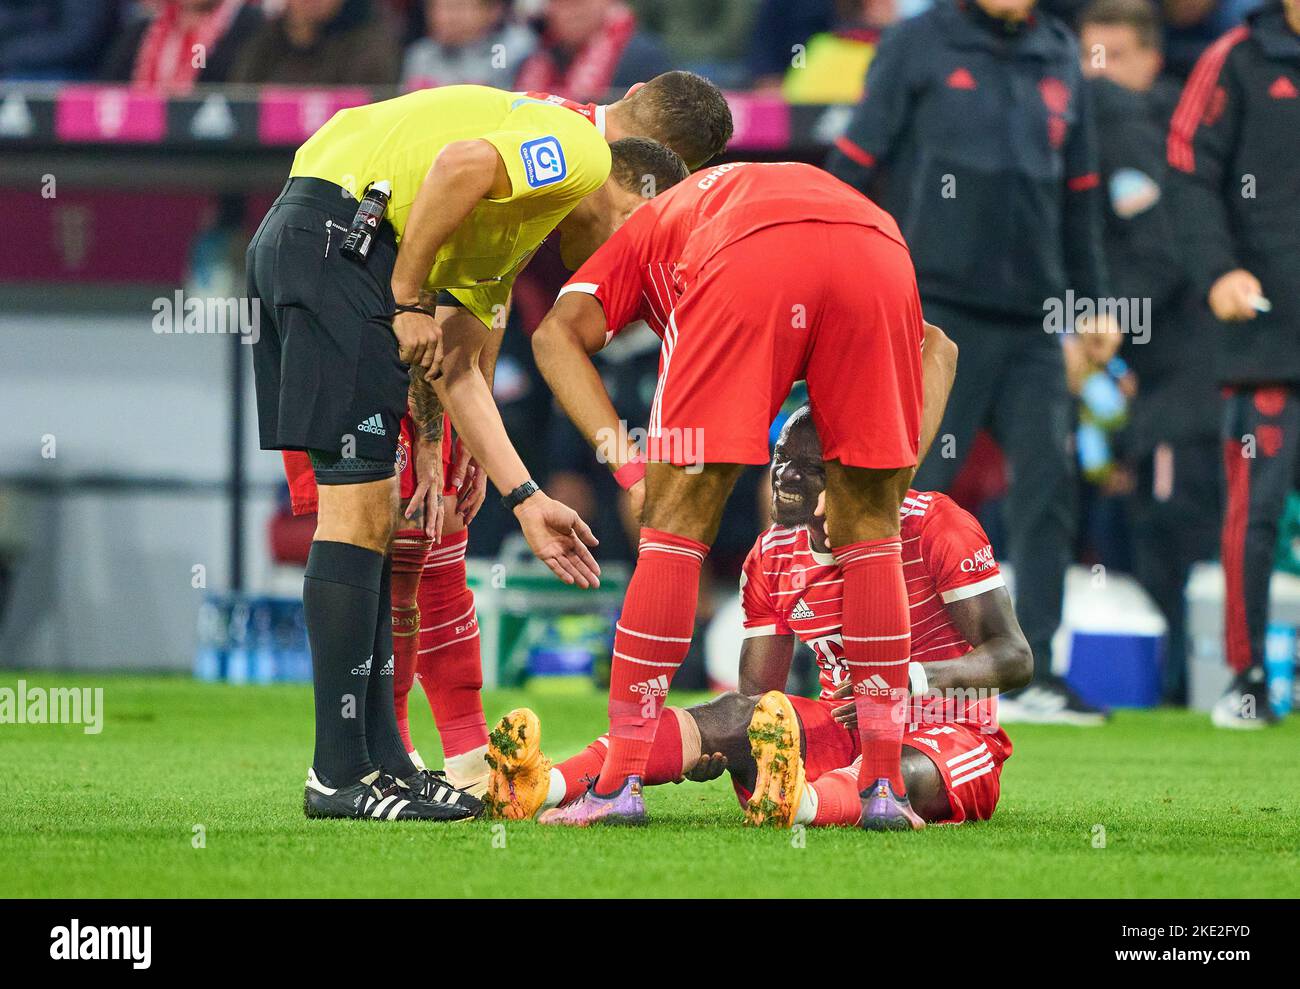 Sadio Mane (FCB 17) injury in the match FC BAYERN MÜNCHEN - SV WERDER BREMEN 6-1 1.German Football League on Nov 8, 2022 in Munich, Germany. Season 2022/2023, matchday 14, 1.Bundesliga, FCB, München, 14.Spieltag © Peter Schatz / Alamy Live News    - DFL REGULATIONS PROHIBIT ANY USE OF PHOTOGRAPHS as IMAGE SEQUENCES and/or QUASI-VIDEO - Stock Photo